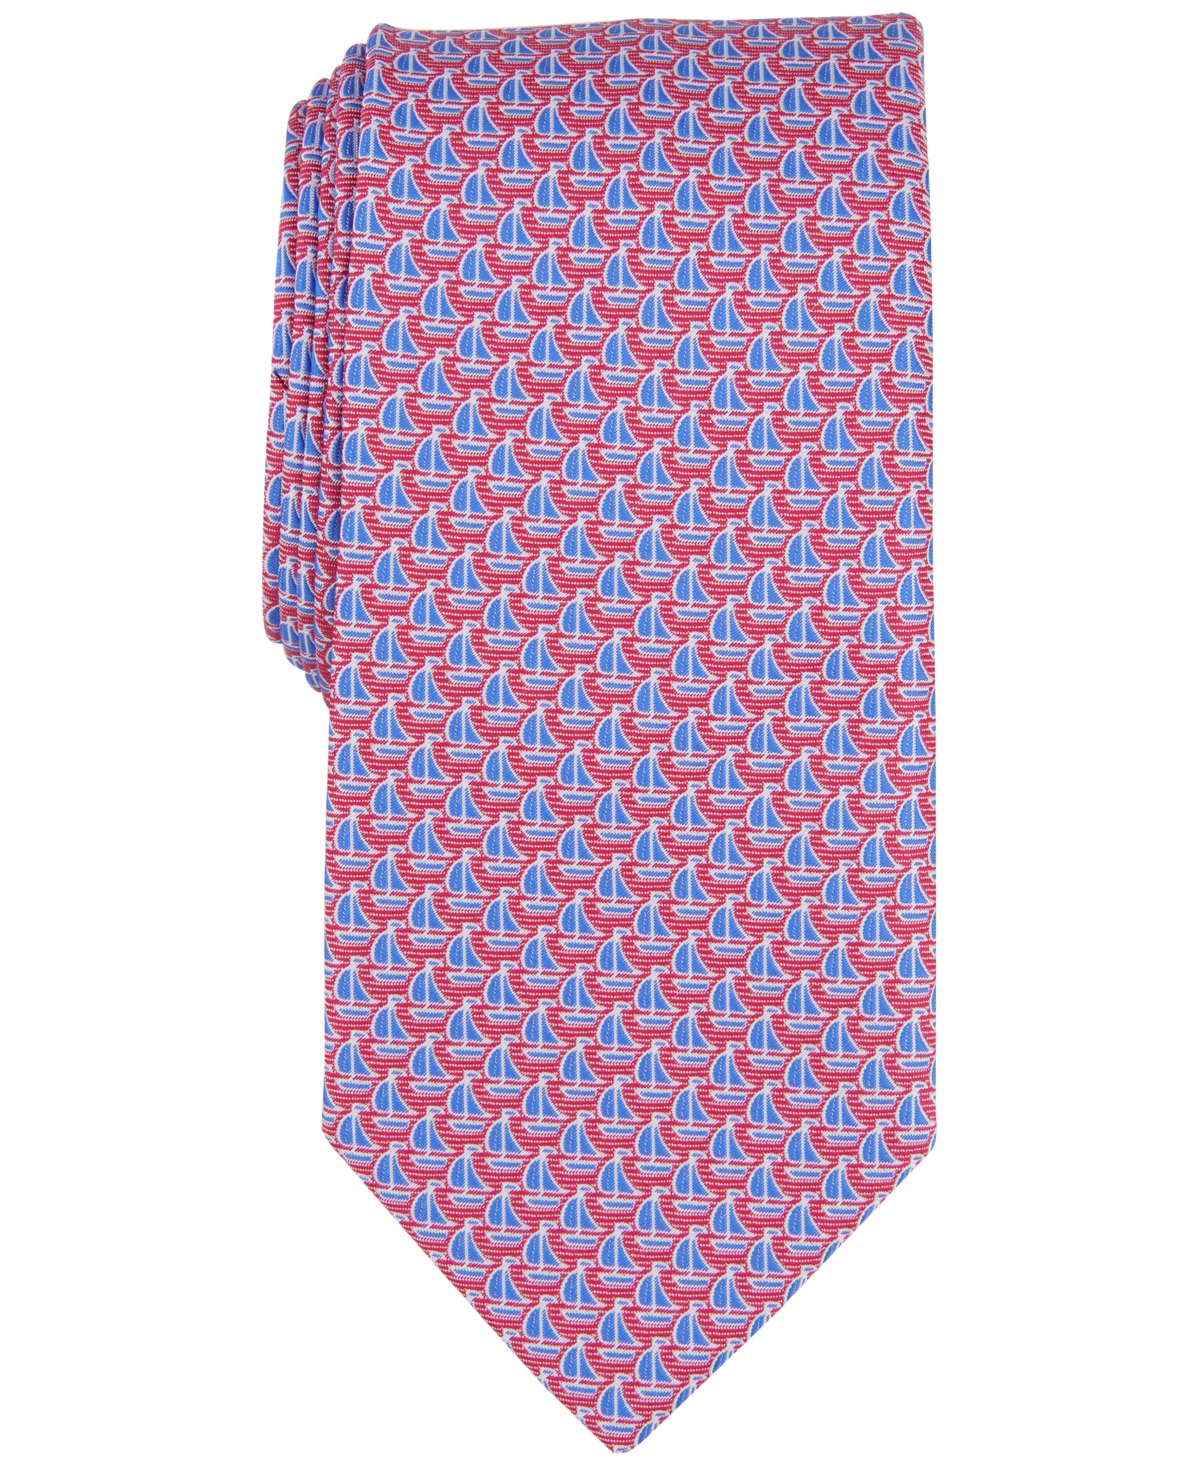 Men's Rhine Sailboat Tie, Created for Macy's - Red